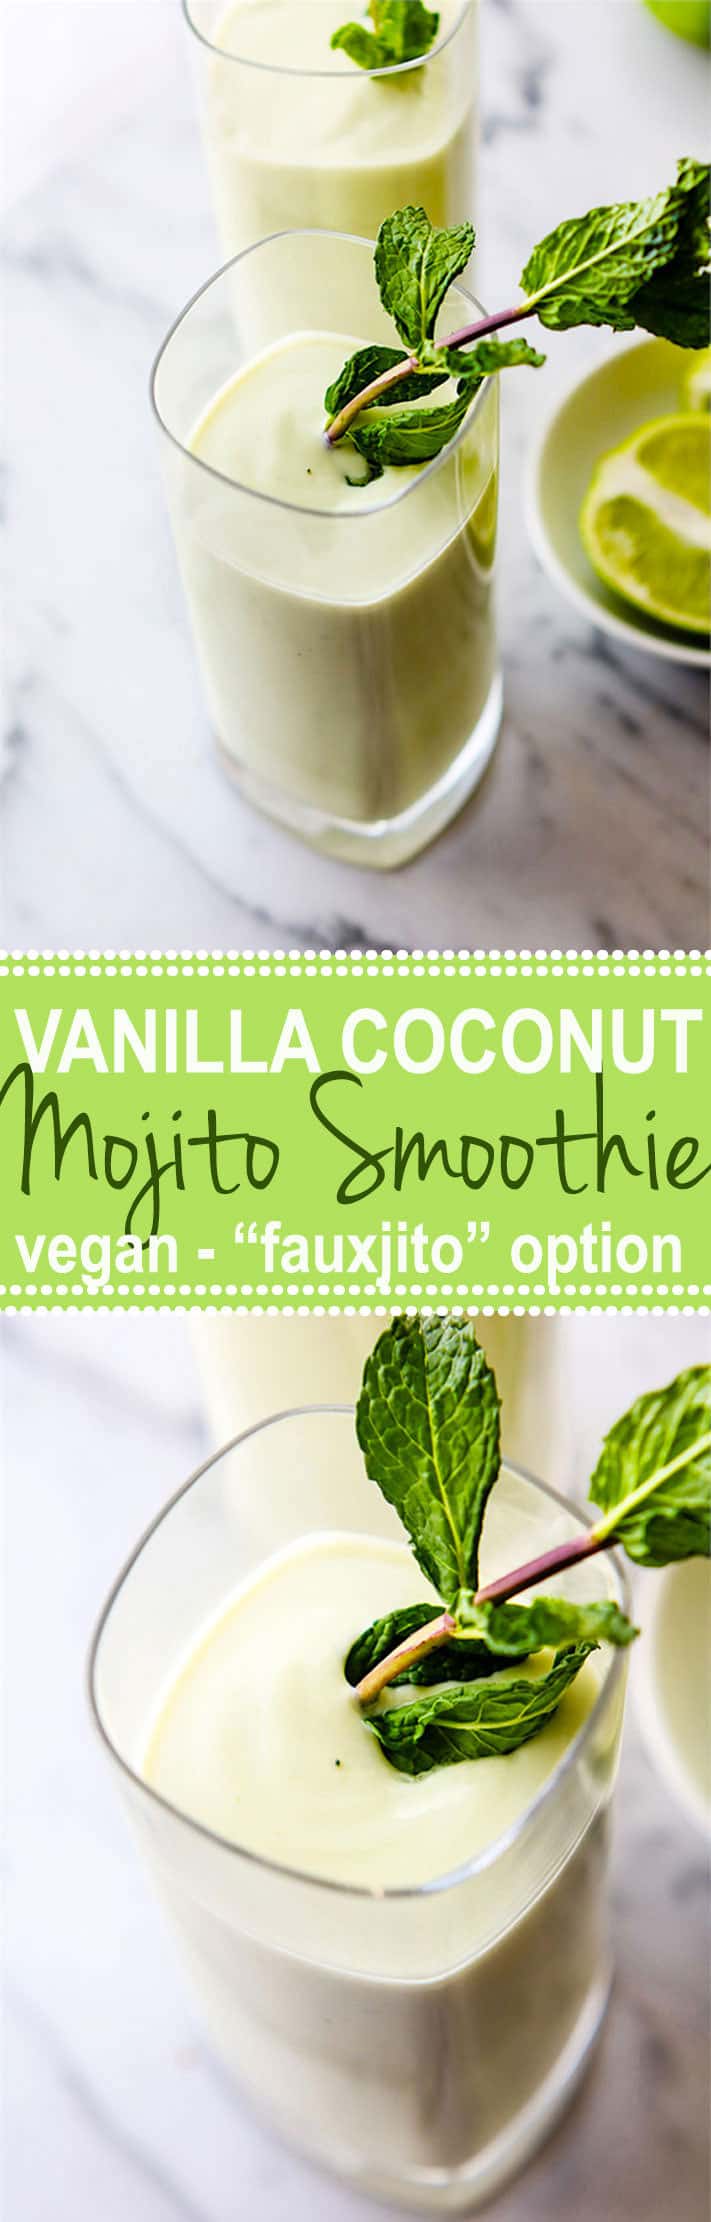 Vegan Creamy Vanilla Coconut Mojito Smoothie plus a Nonalcoholic Fauxjito Option! A delicious and more nutritious cocktail/mocktail you can get on board with. Refreshing coconut mojito smoothie with creamy avocado, vanilla, maple syrup, coconut milk, lime, and mint.